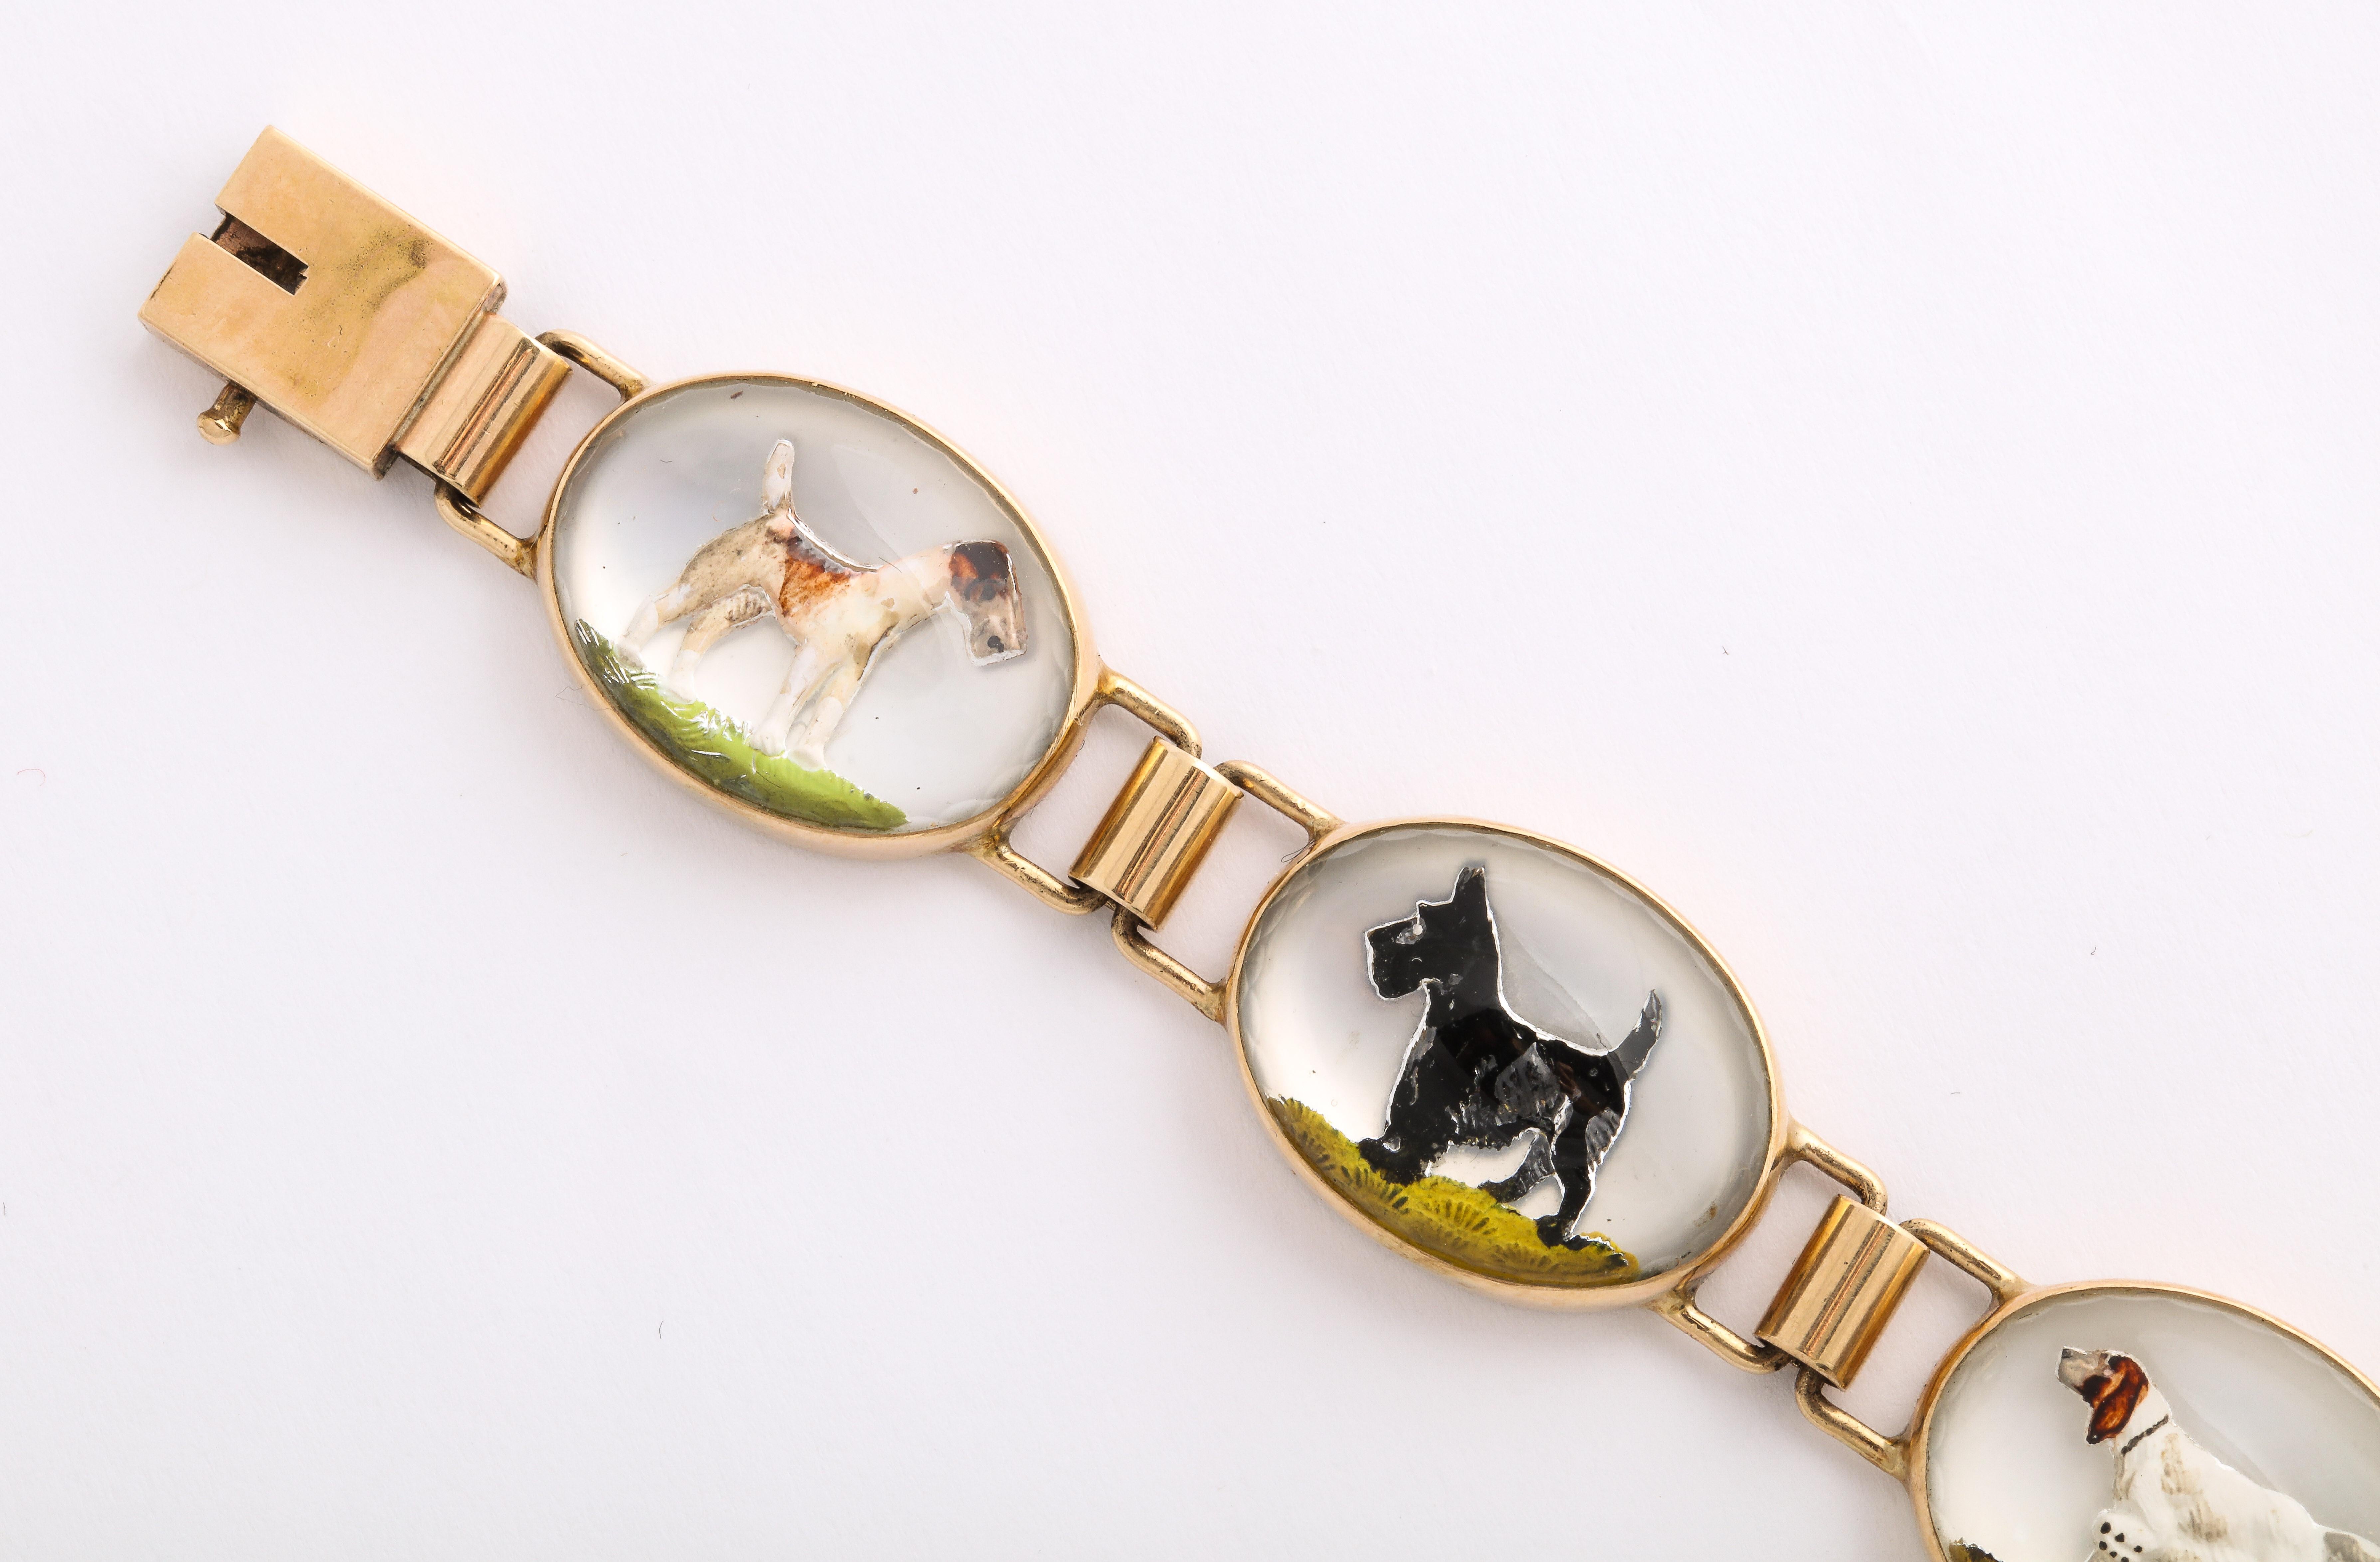 Oval links of 14 Kt gold and rock crystal hold cuddly Scottie Dogs, Terriers and Hounds their images carved and transfixed on a mother of pearl background, The bracelet is a whimsical conversation piece made c. 1930 in the United States. I have not